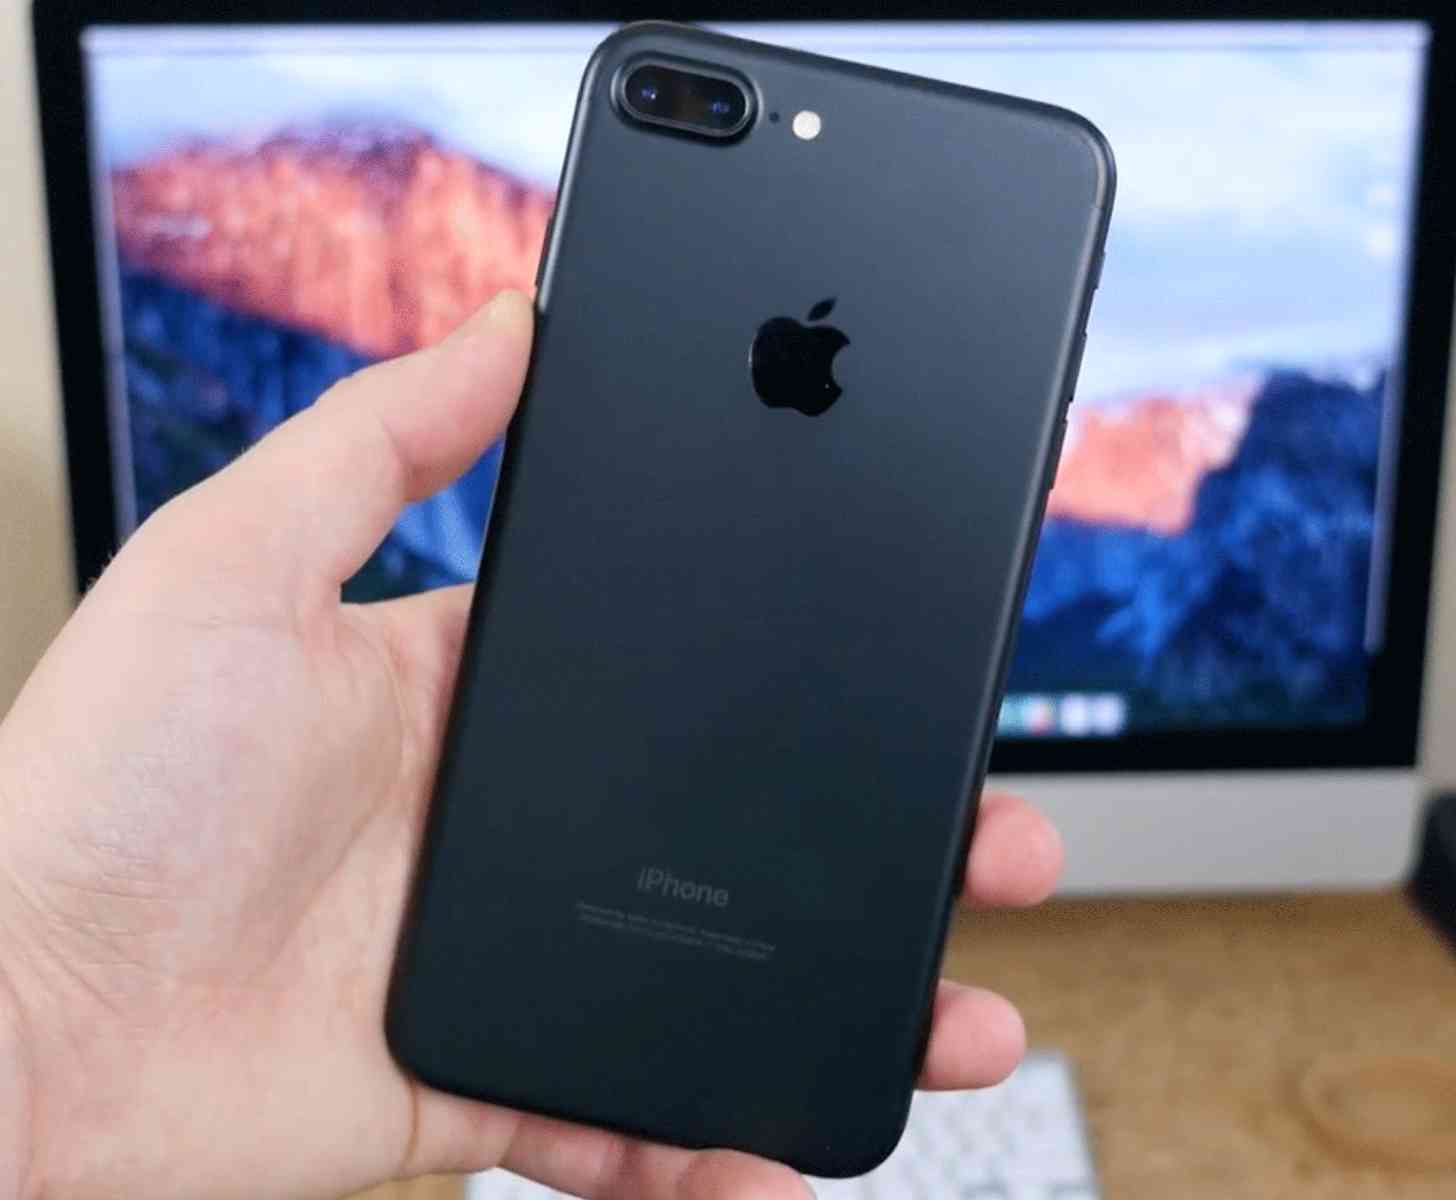 iPhone 7 Plus rear hands-on